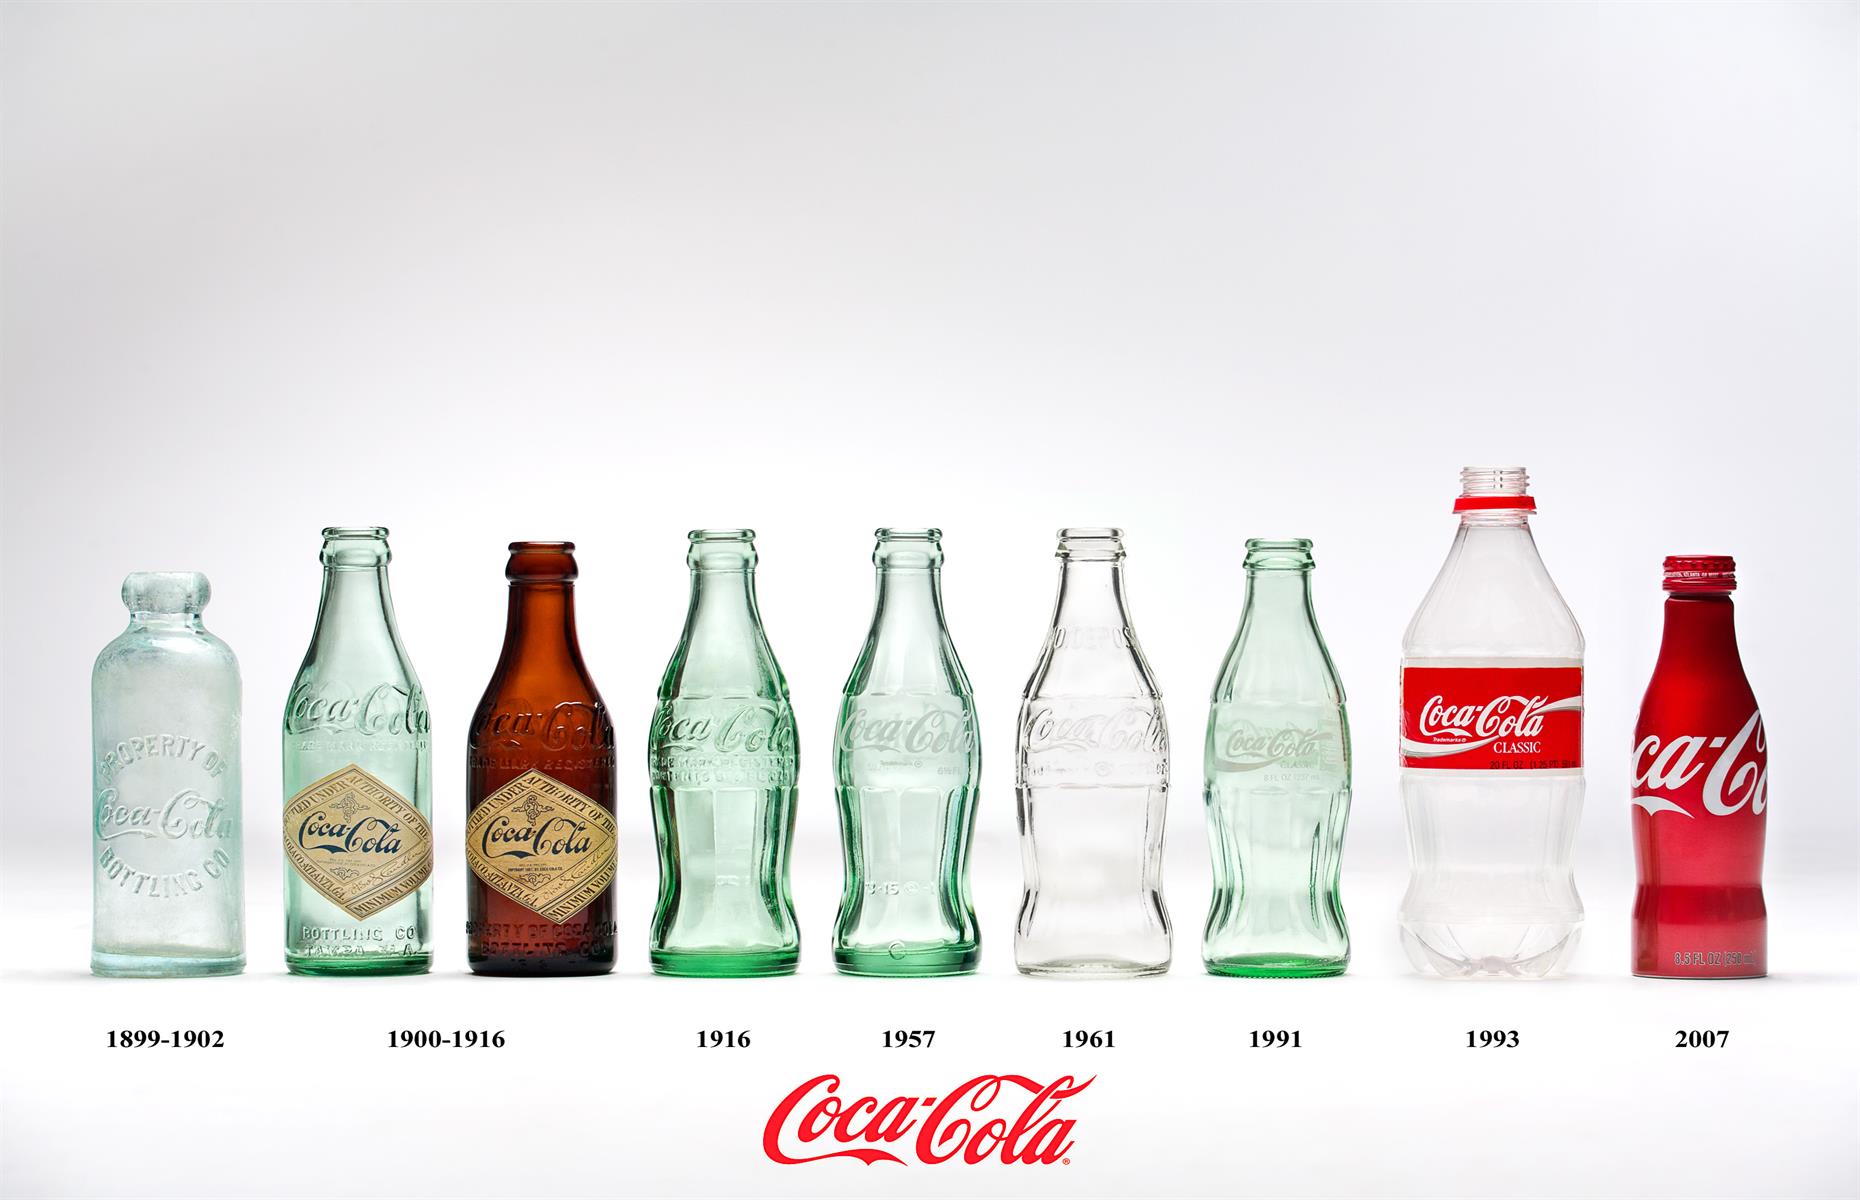 In 1915, owner Candler set up a competition to create a bottle design that would distinguish Coca-Cola from its competitors. The winner was The Root Glass Company based in Terre Haute, Indiana. The bottle’s bulbous design was modeled on a cocoa bean – an ingredient incorrectly believed to be in Coca-Cola. This image shows how the bottle's design has changed from 1899 to 2007.